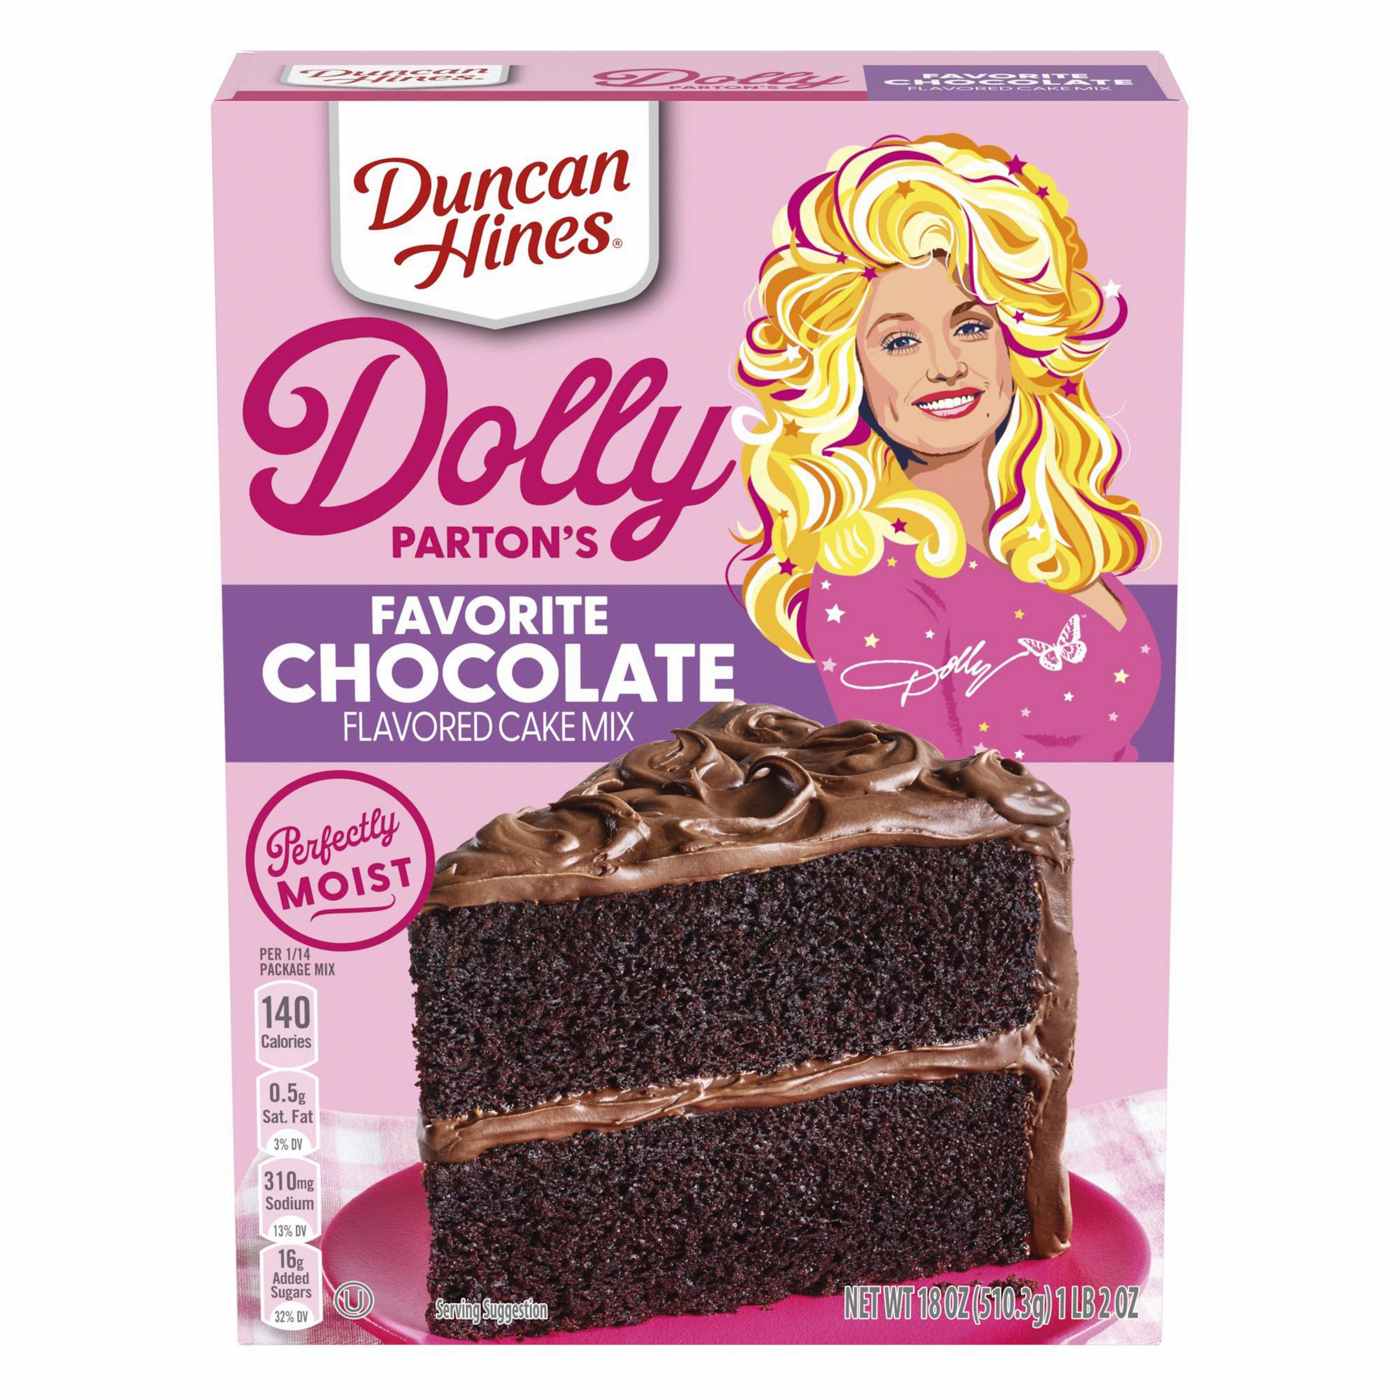 Duncan Hines Dolly Parton's Favorite Chocolate Cake Mix; image 1 of 4